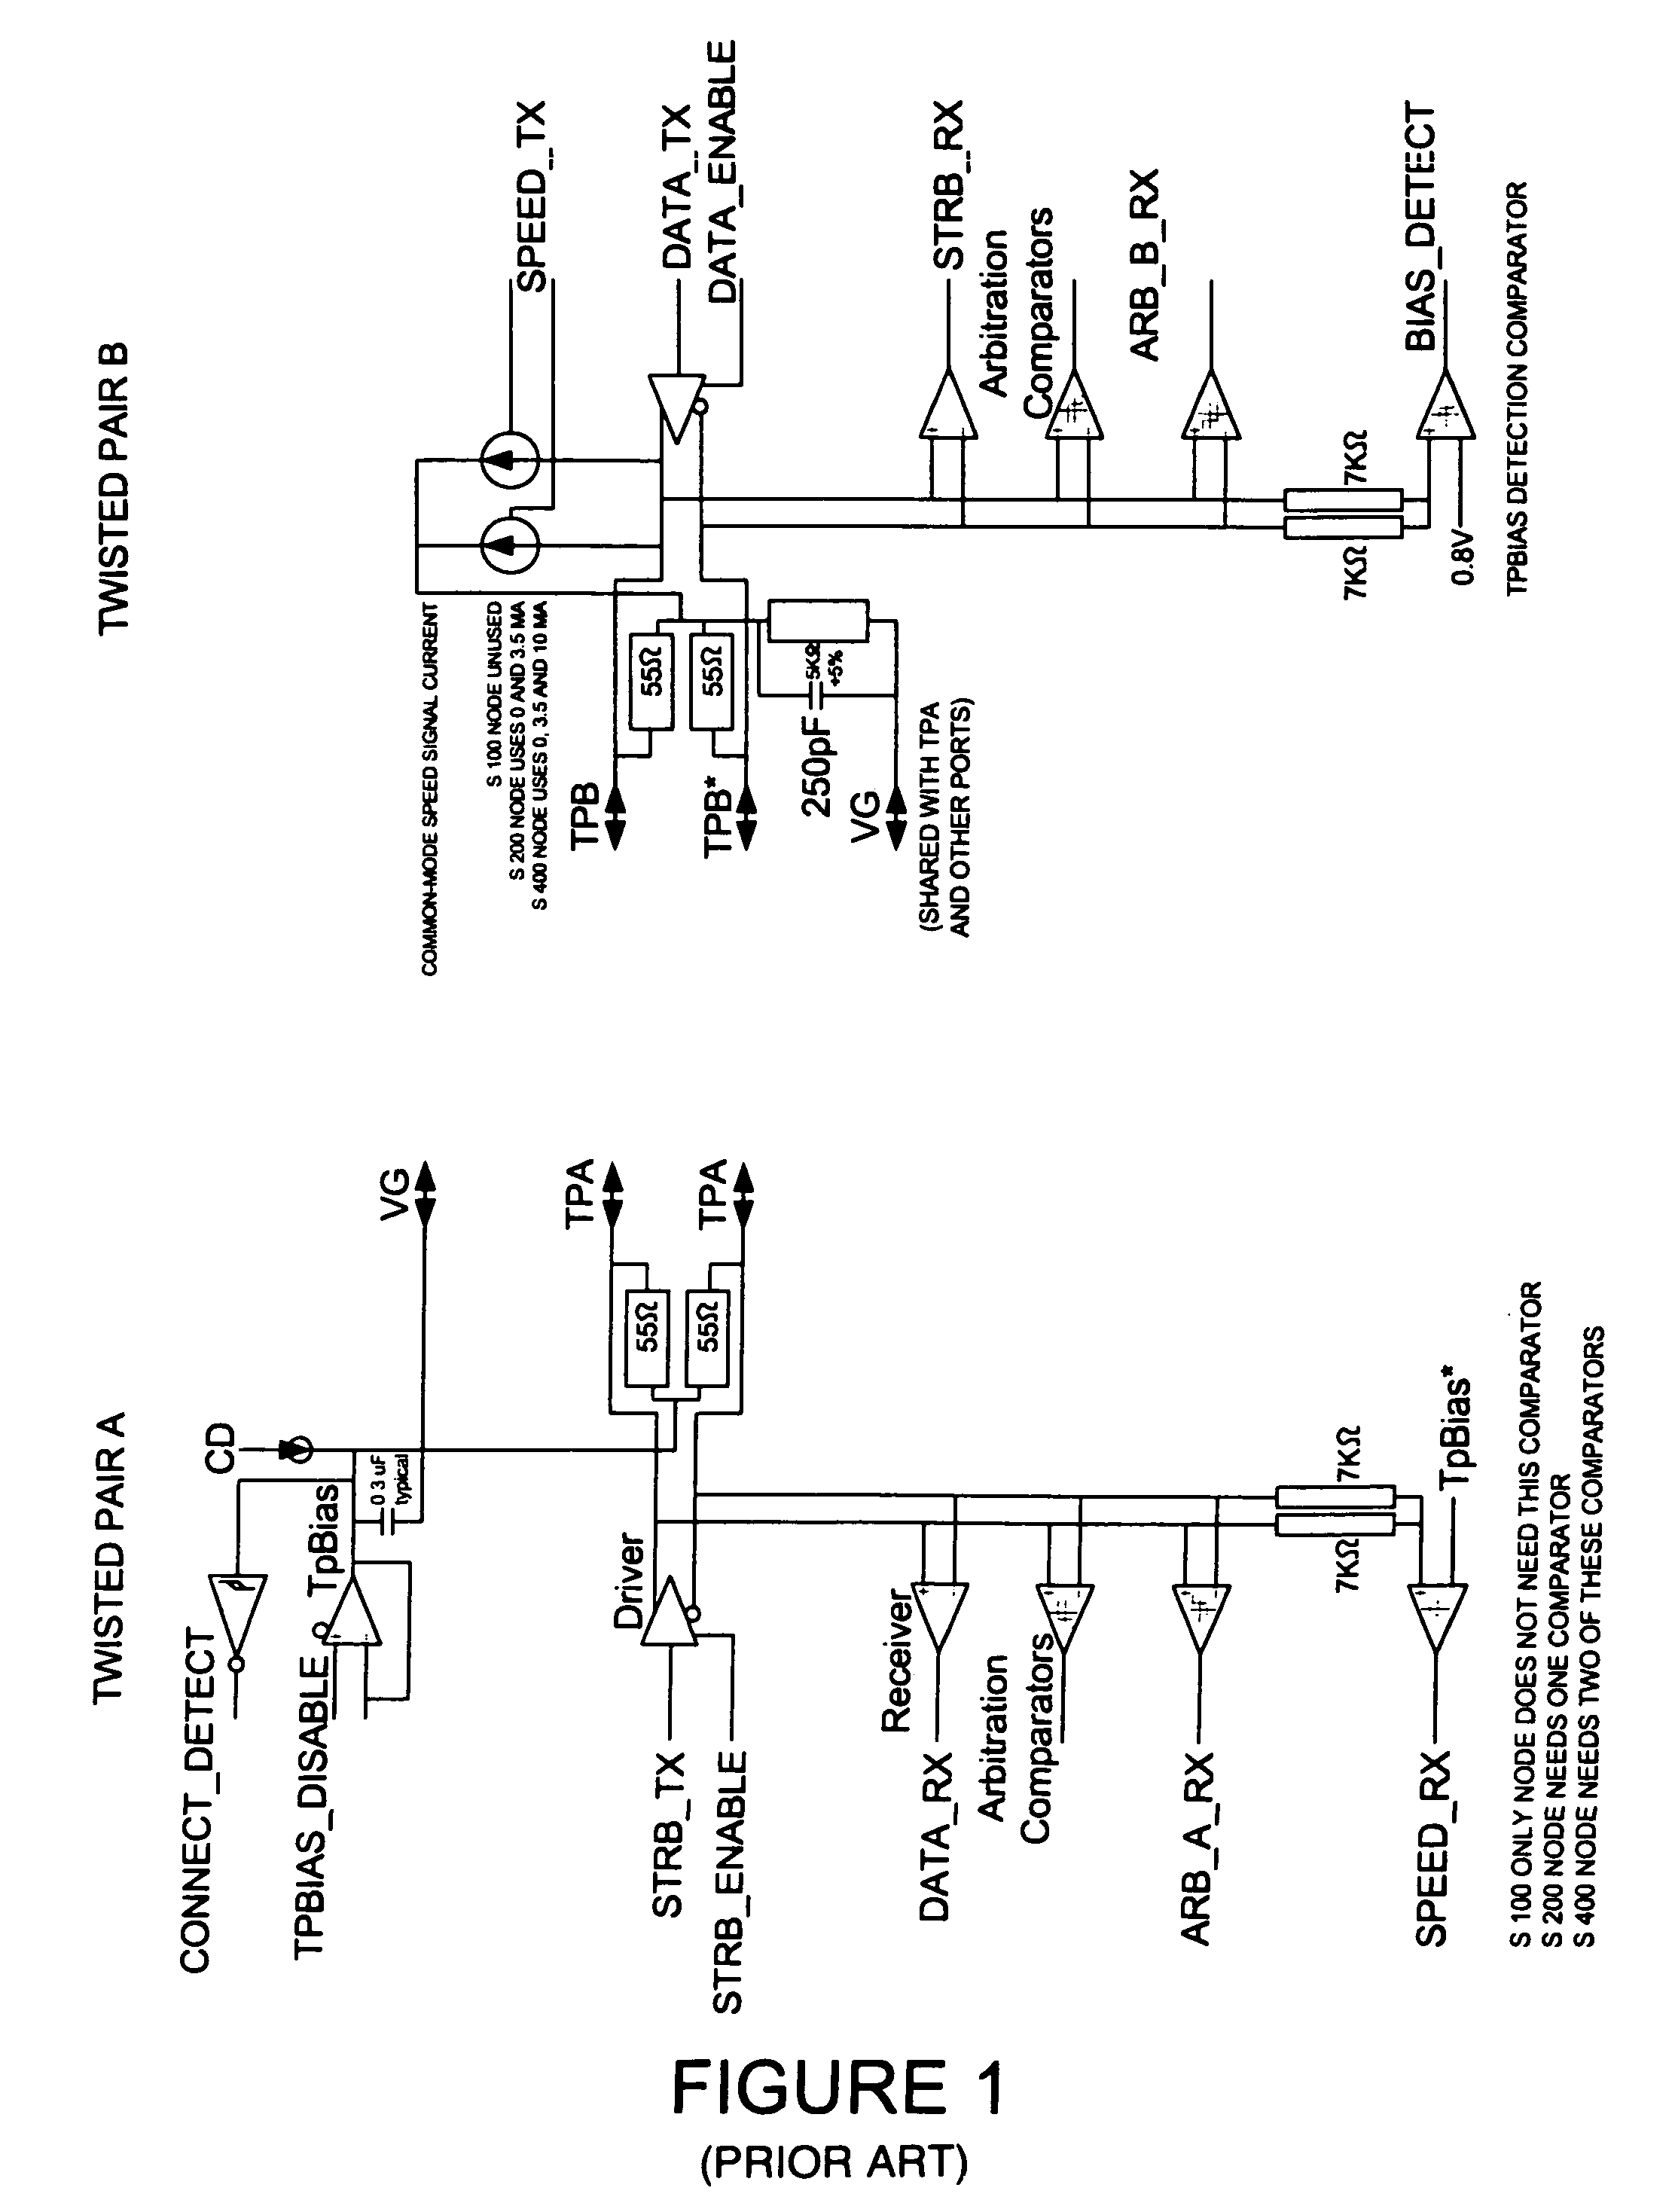 Differential current-mode driver with high common-mode range and controlled edge rates